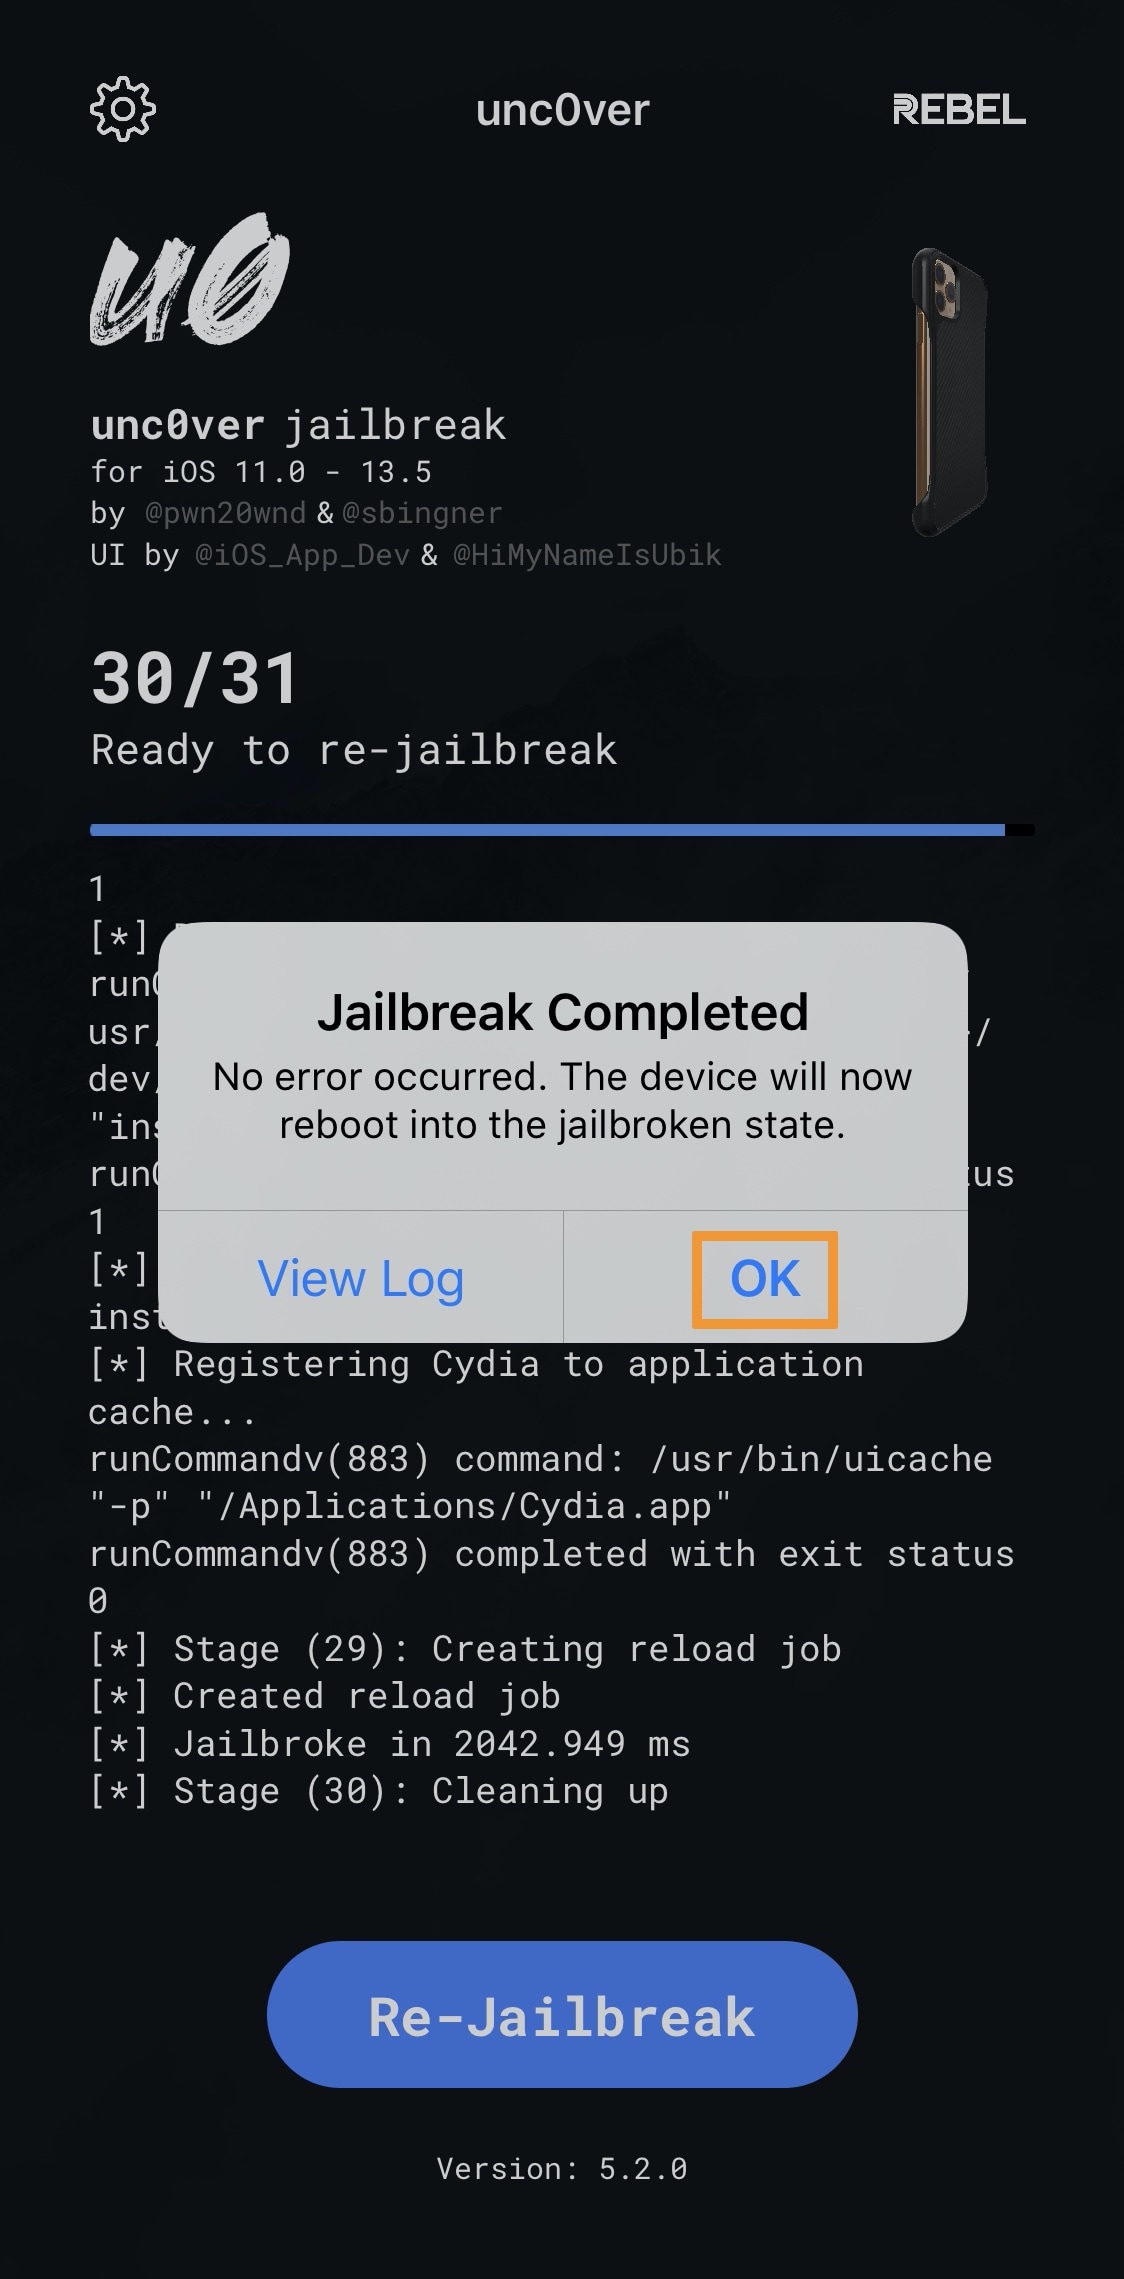 Once completed, your device will reboot, and Cydia will be available.
Congratulations, your device is now jailbroken!